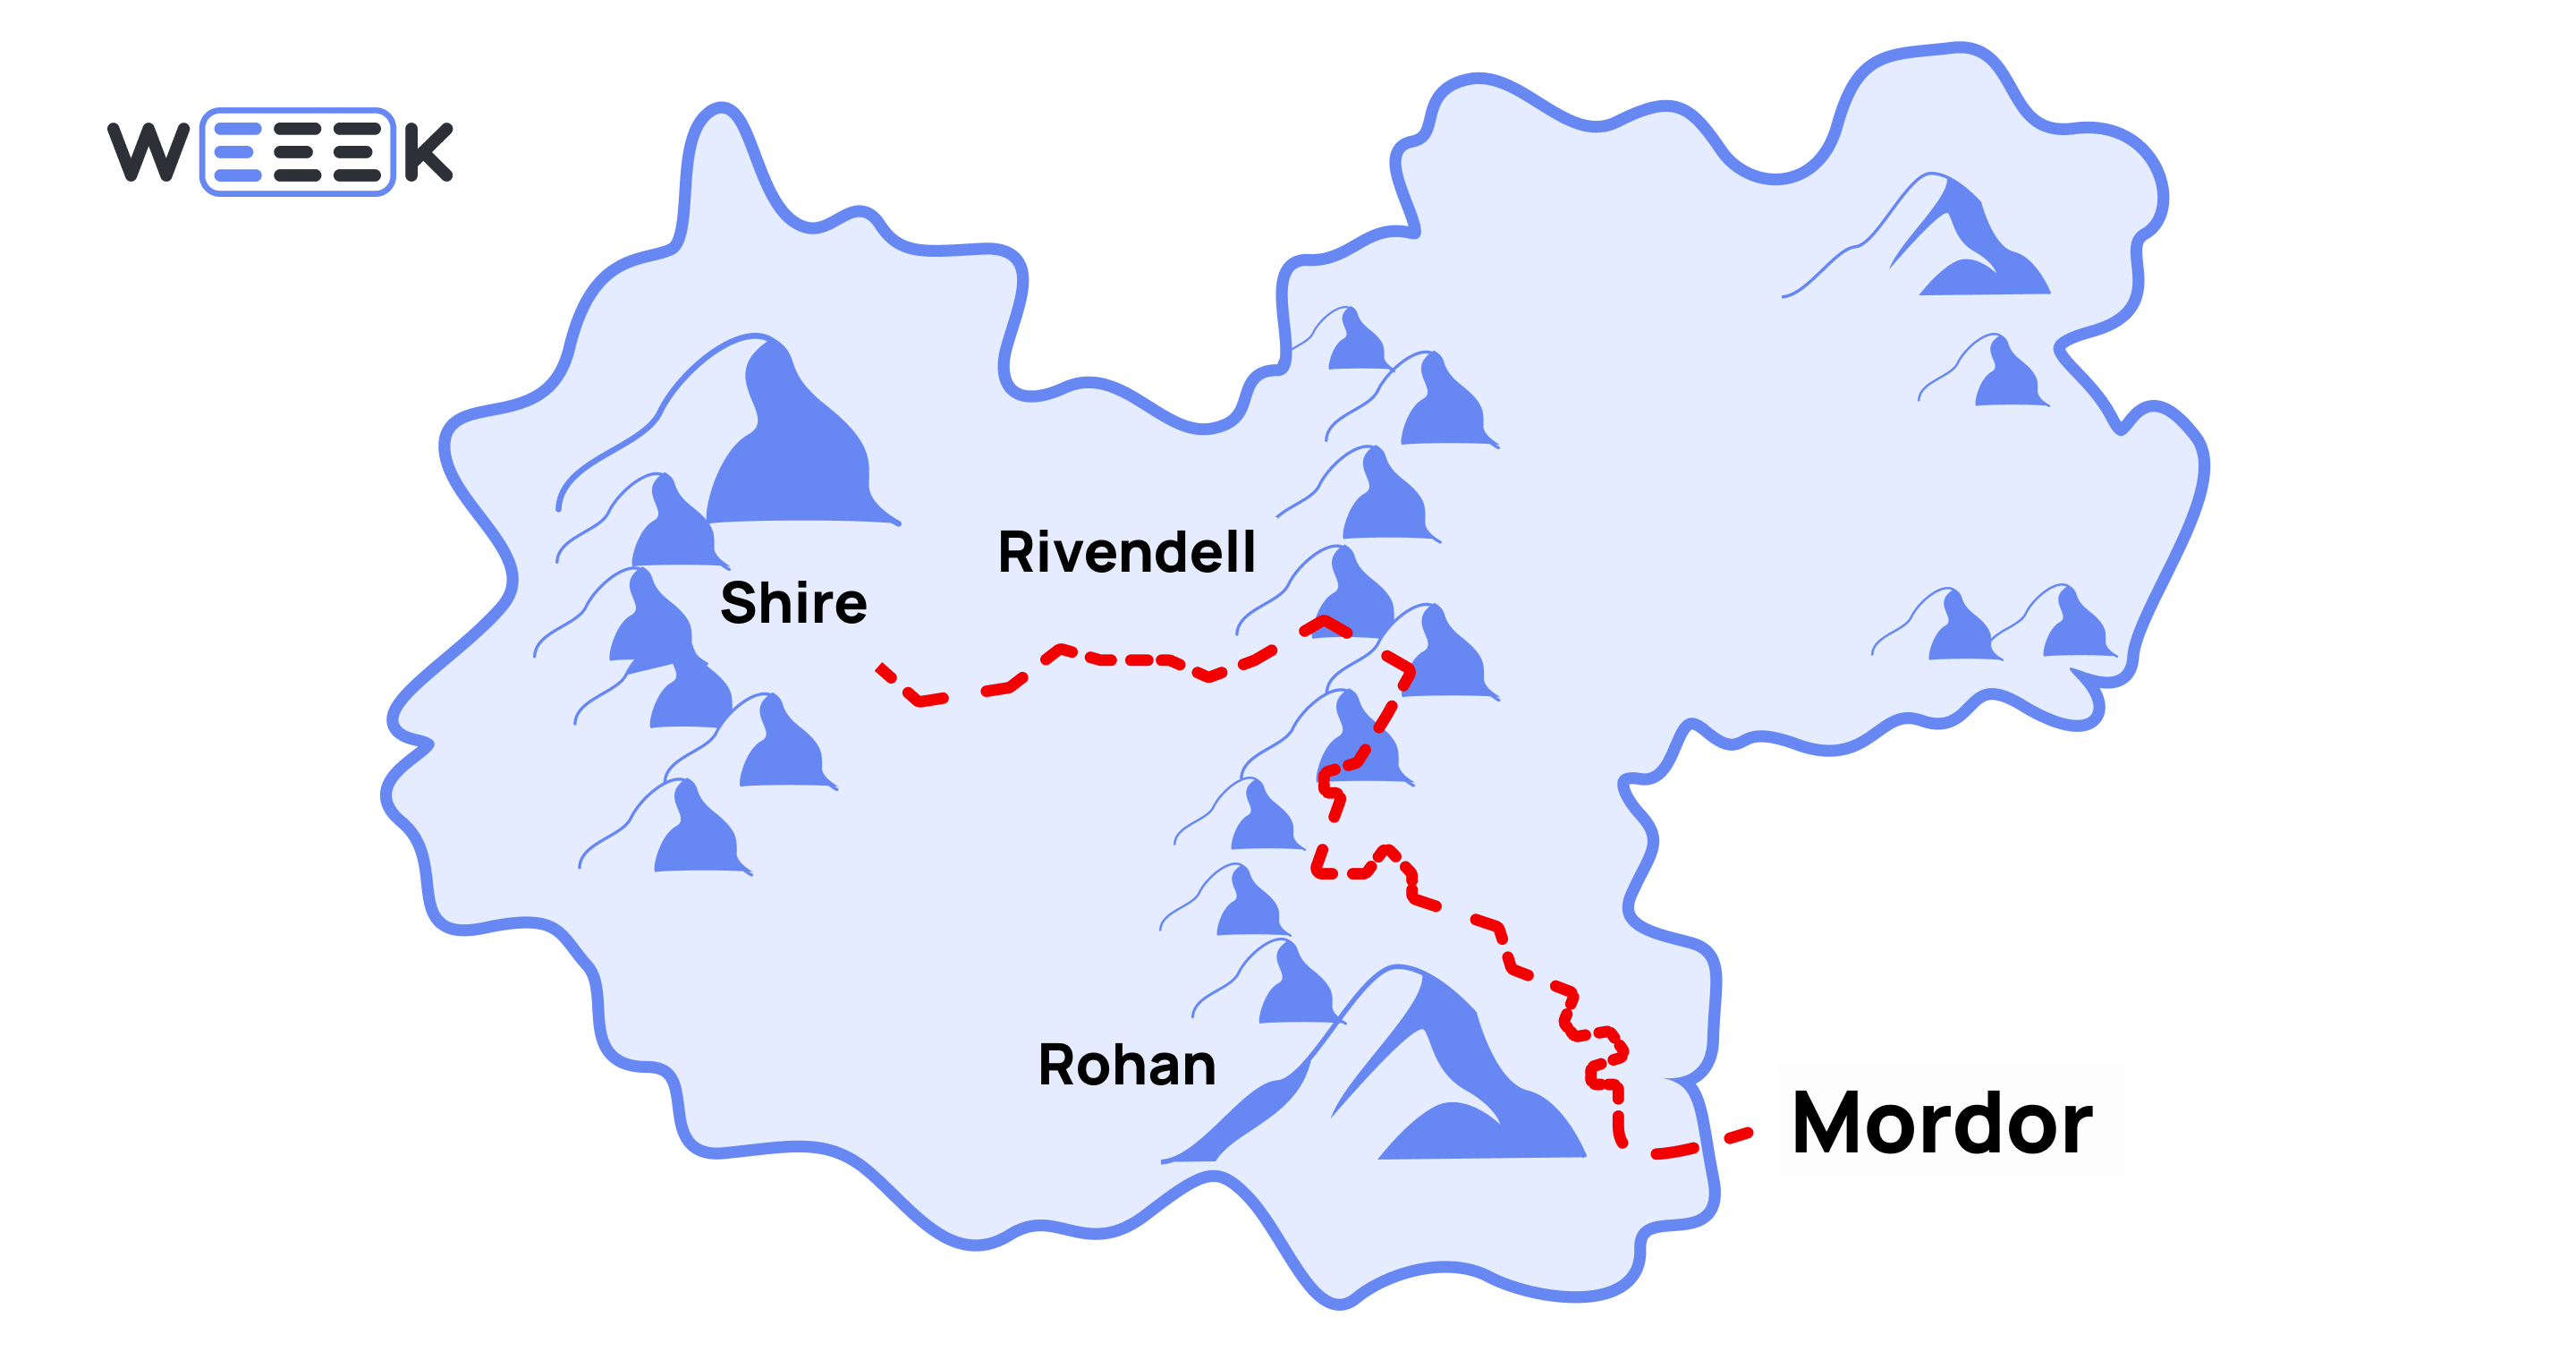 Example: A Roadmap of Frodo and Sam's Adventures